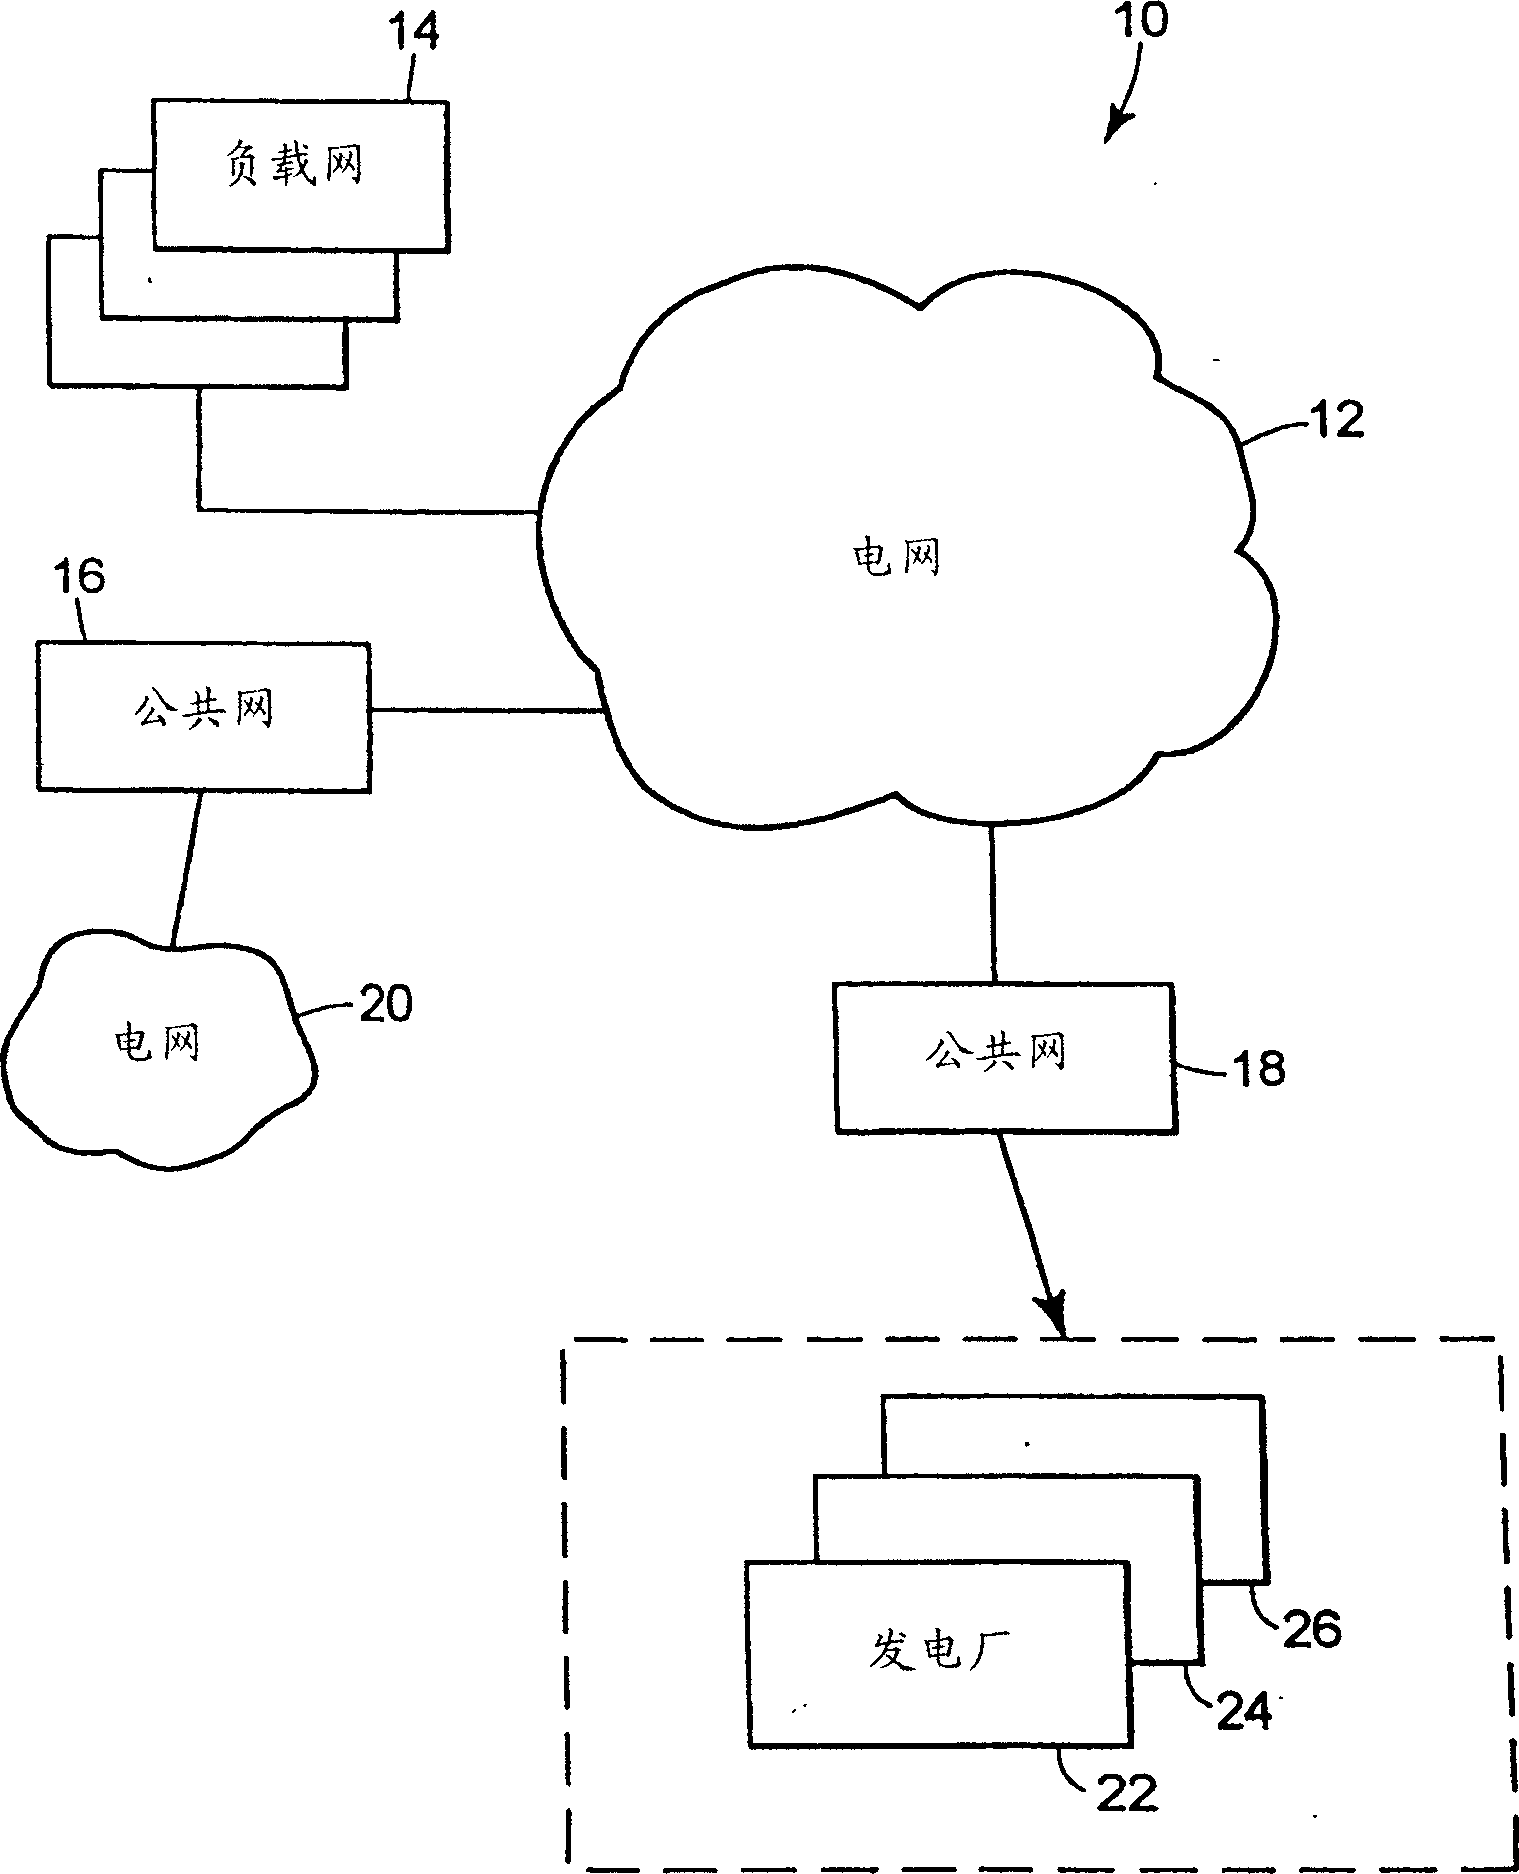 Method and apparatus for providing economic analysis of power generation and distribution